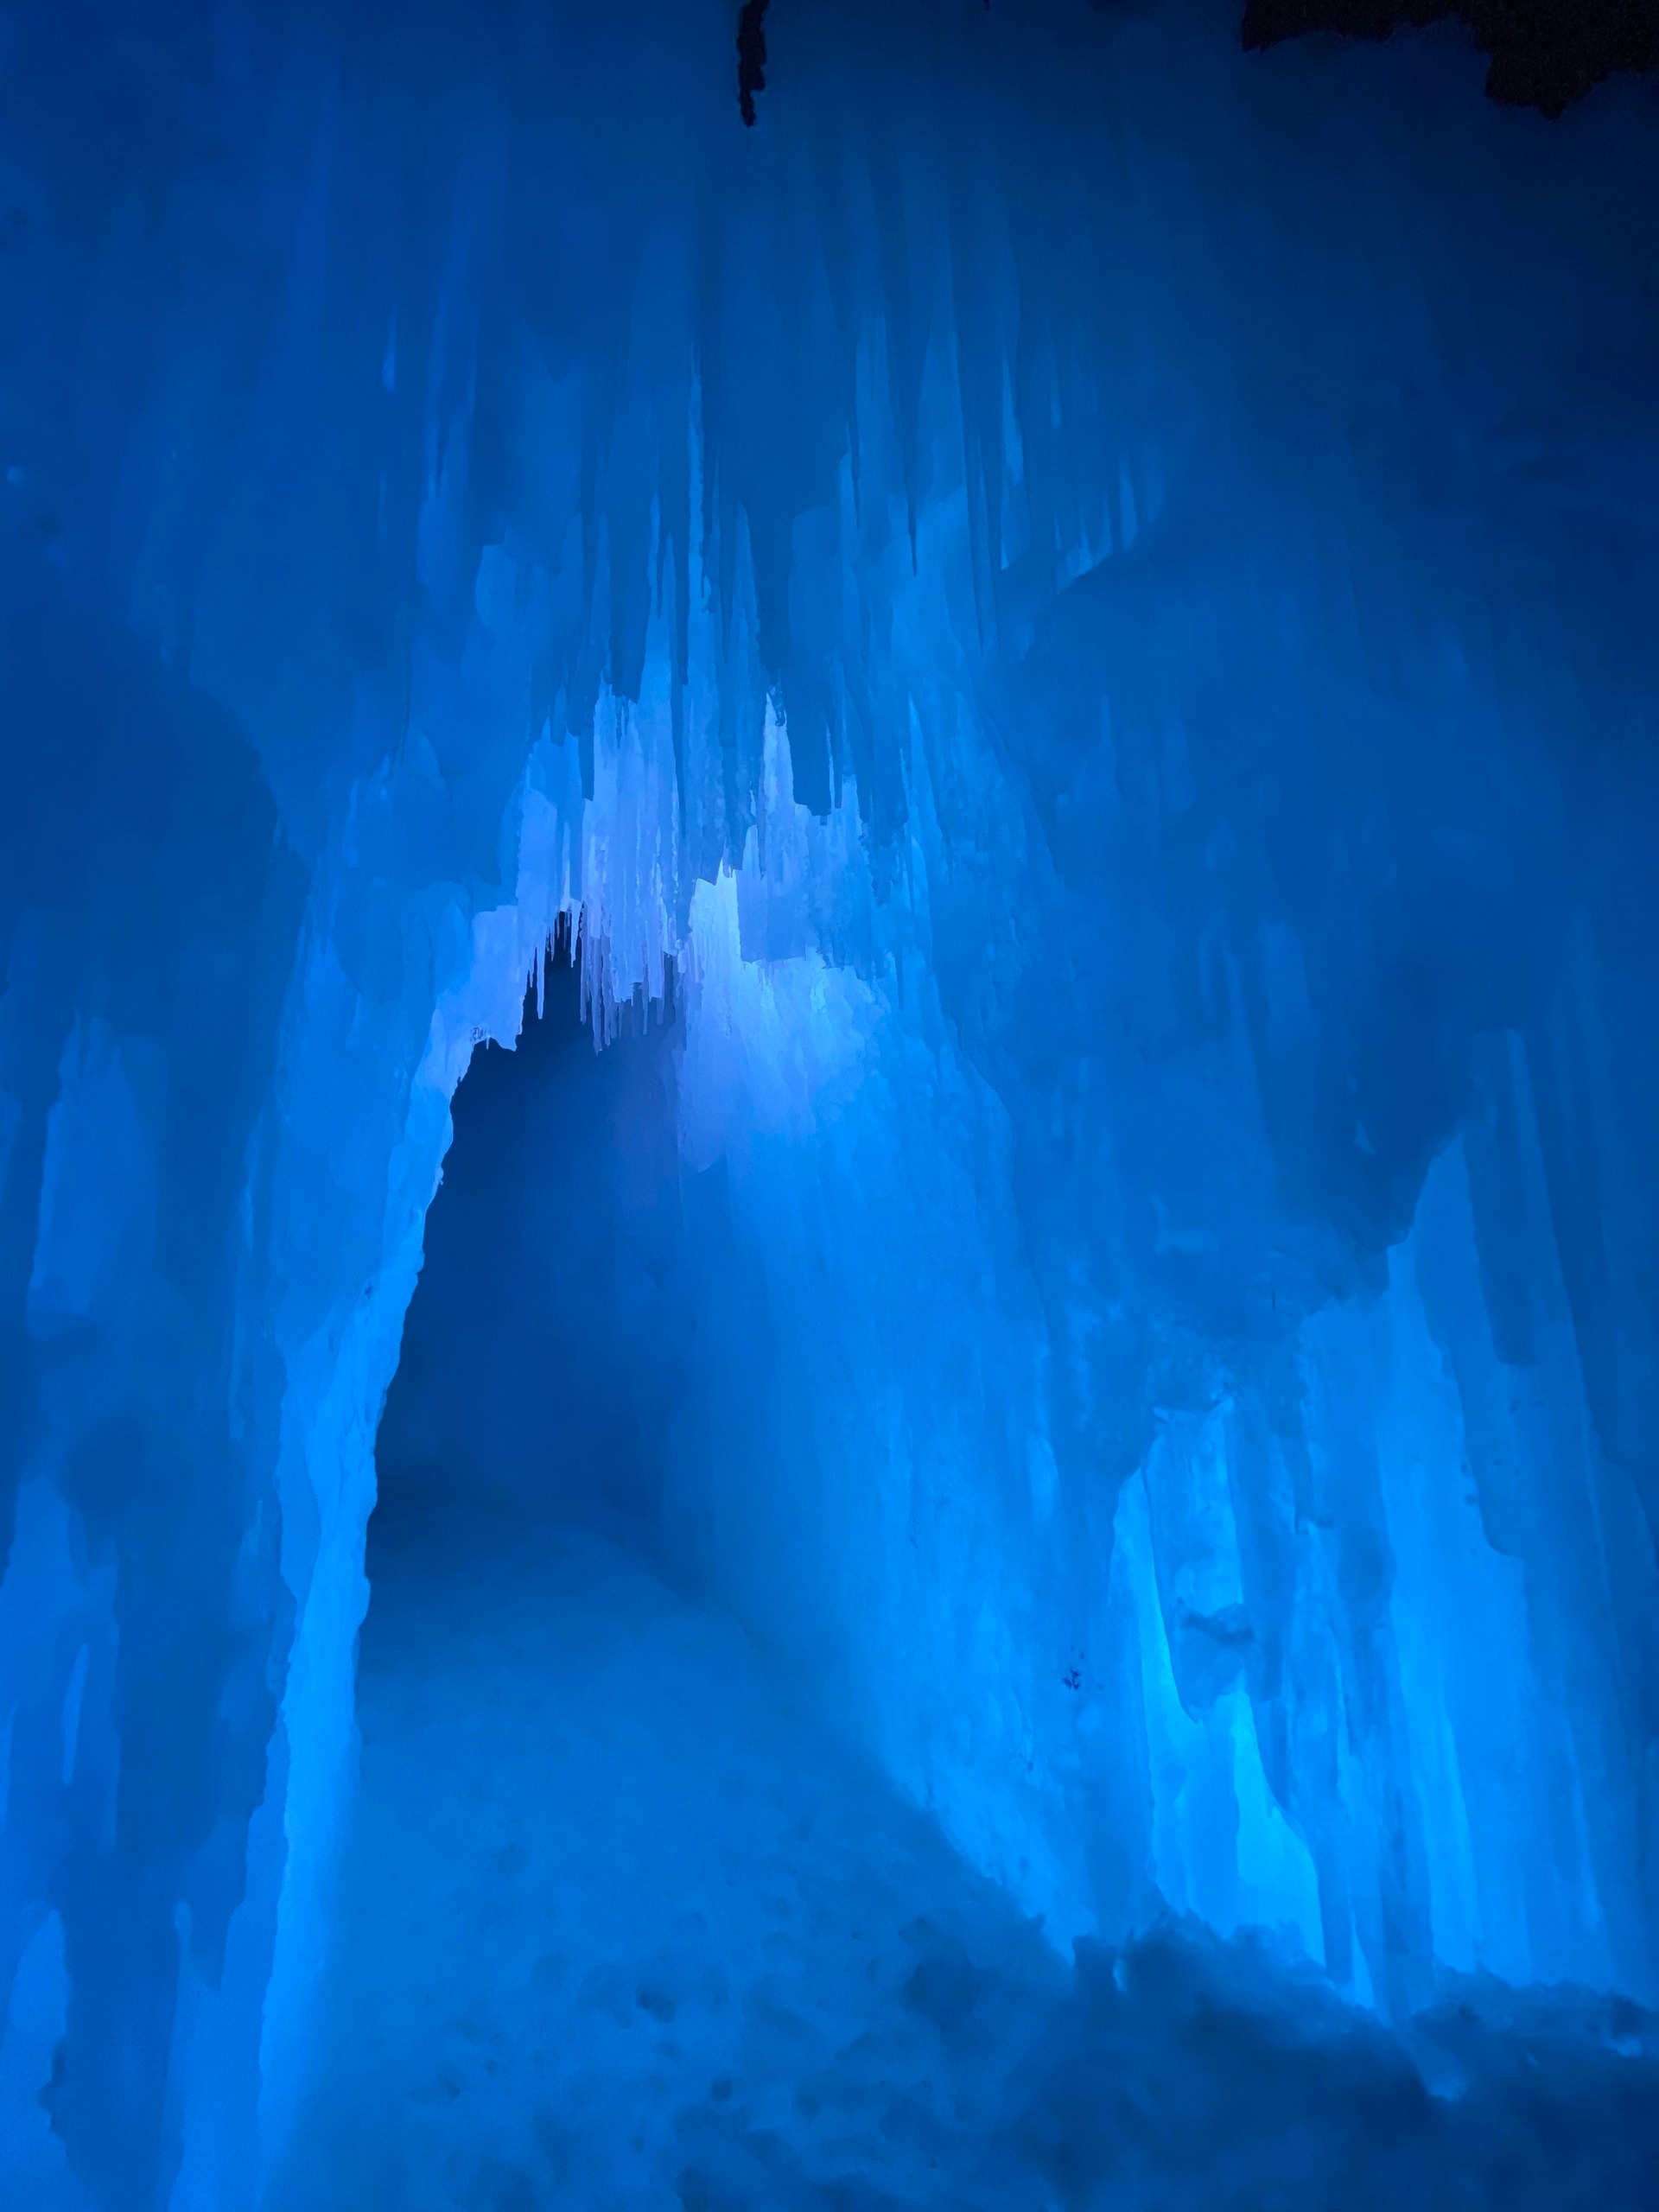 THINGS TO DO IN THE WINTER IN PARK CITY, UT | ICE CASTLES